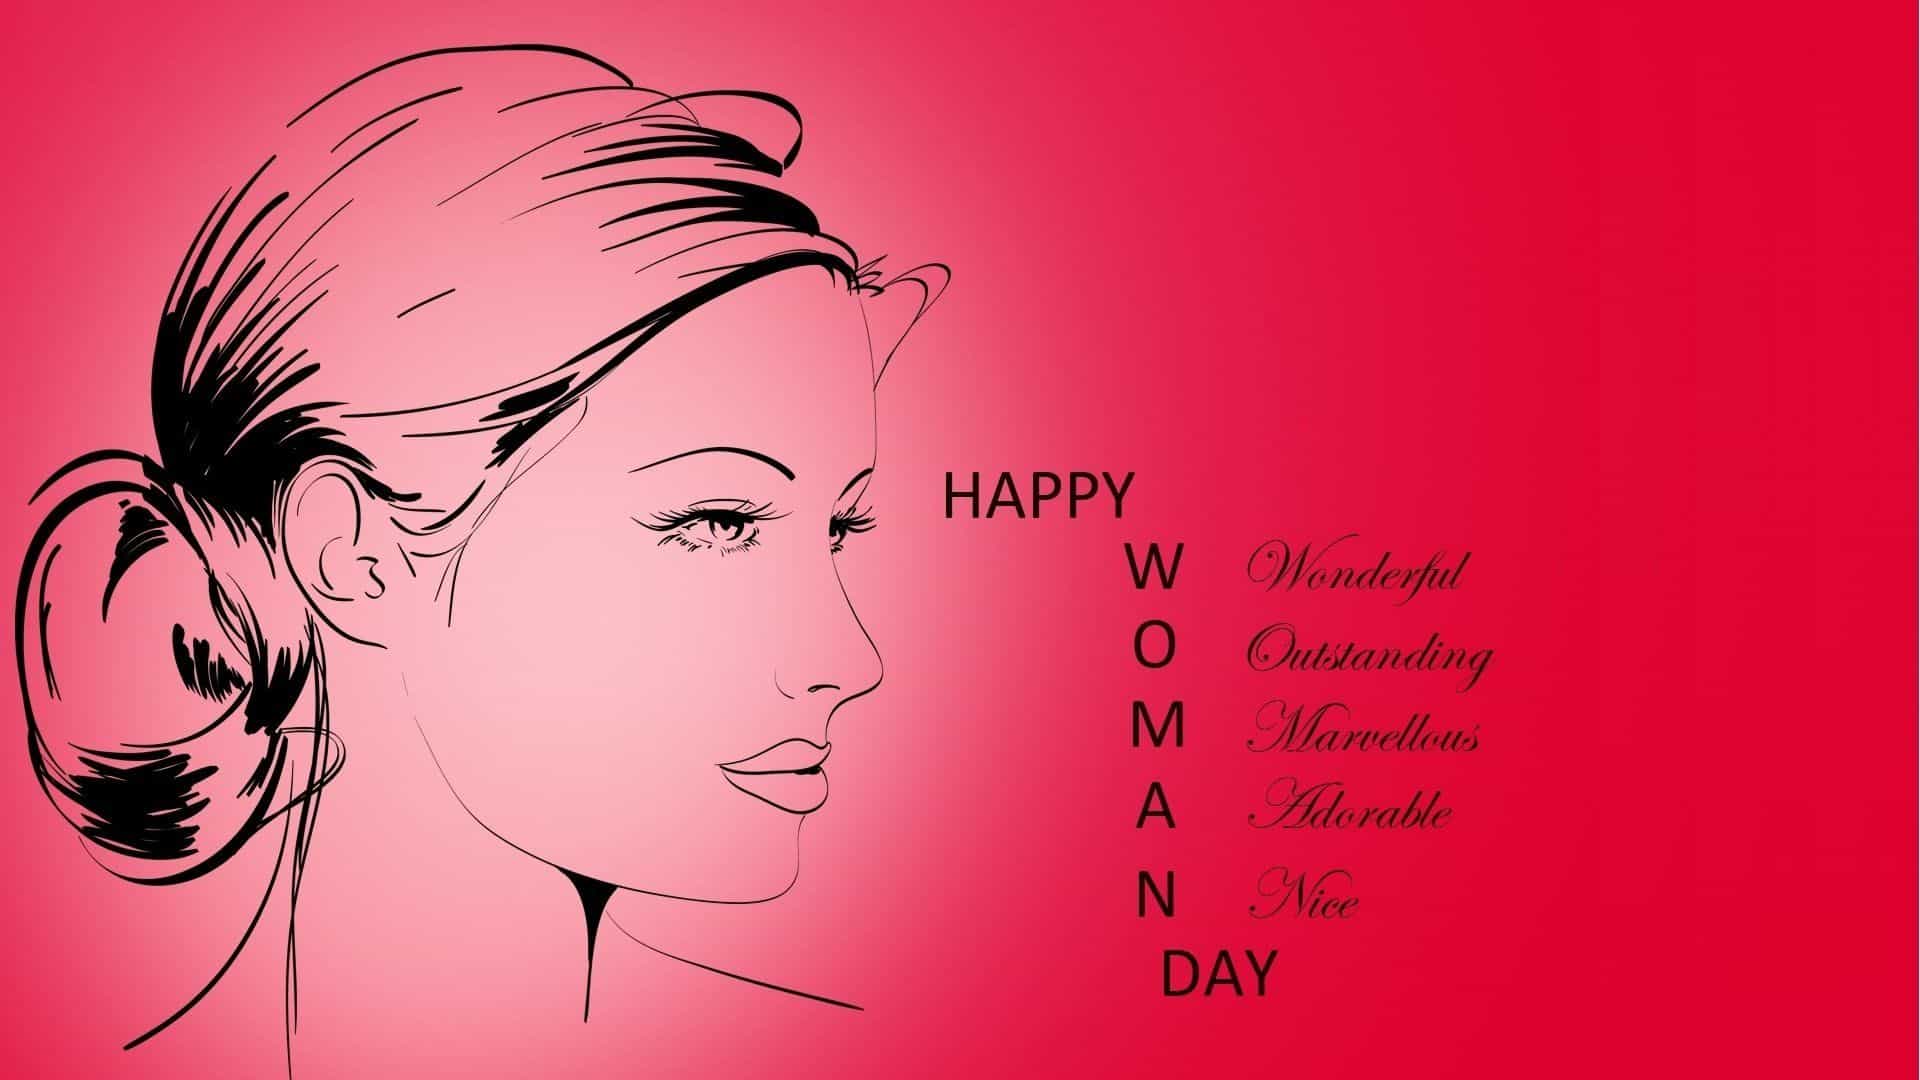 100+] Womens Day Images, Pics, Photos & Wallpaper (HD)